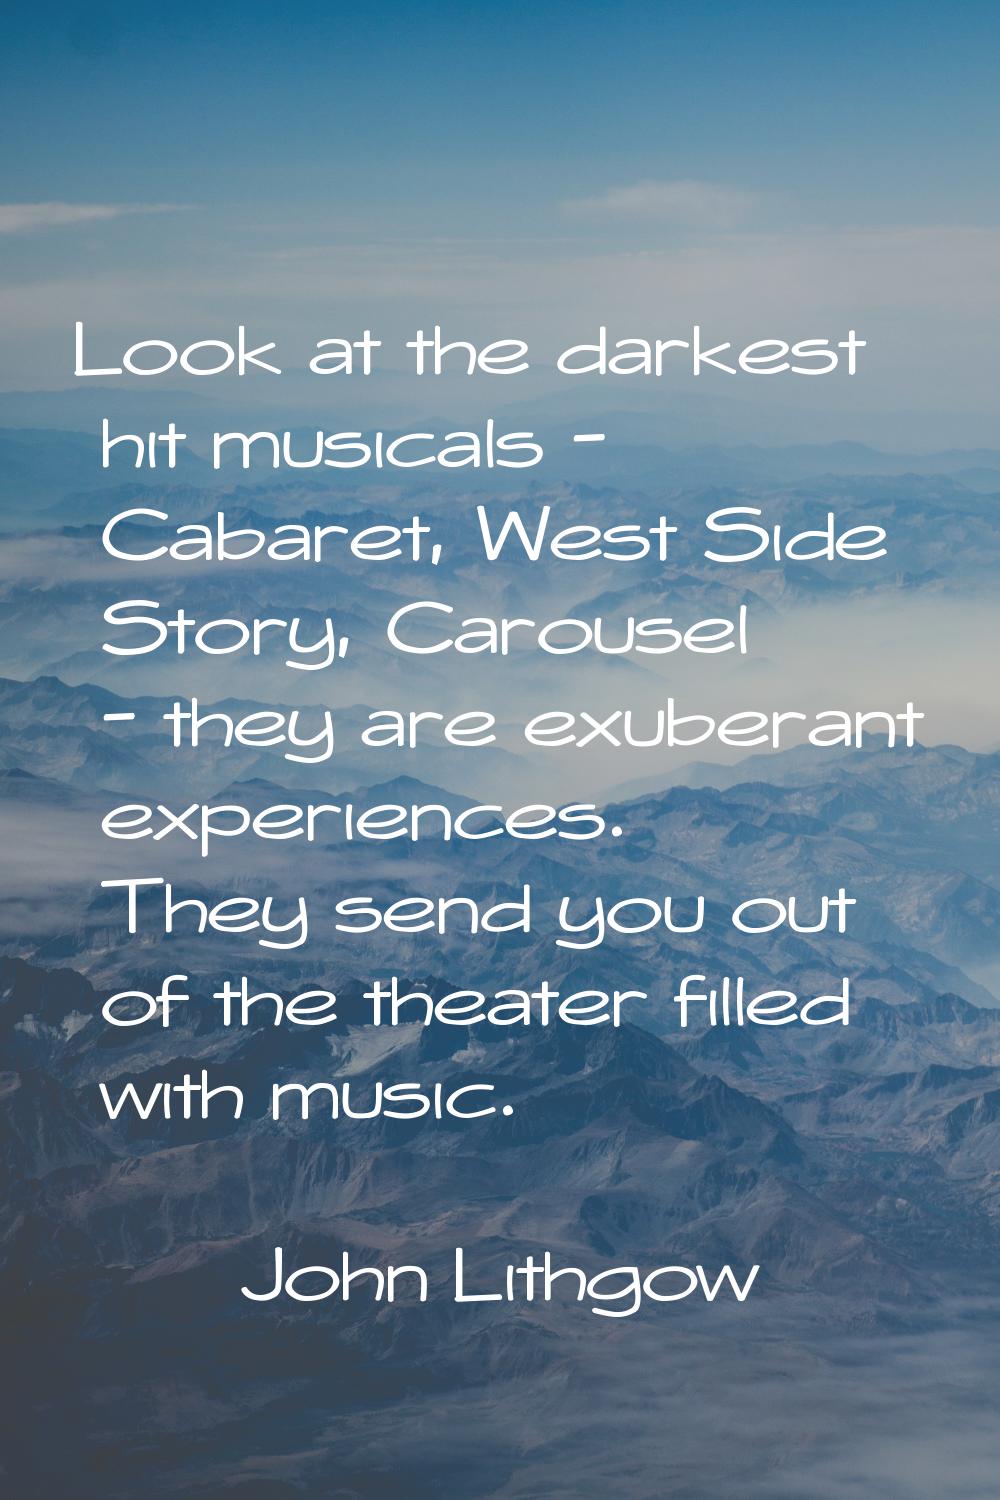 Look at the darkest hit musicals - Cabaret, West Side Story, Carousel - they are exuberant experien